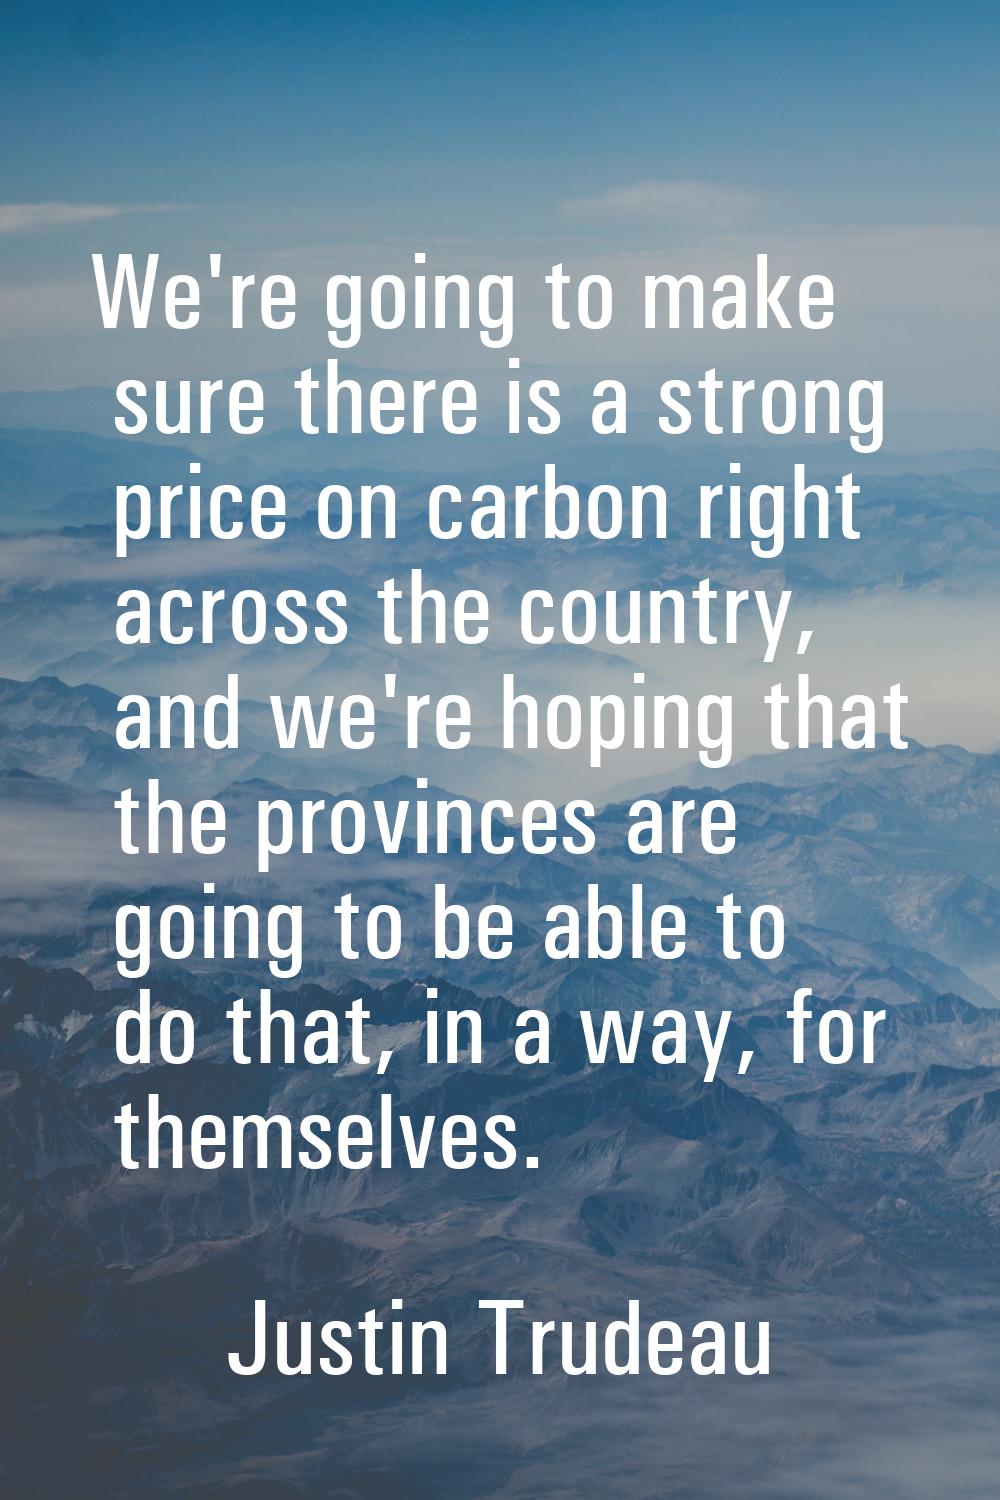 We're going to make sure there is a strong price on carbon right across the country, and we're hopi